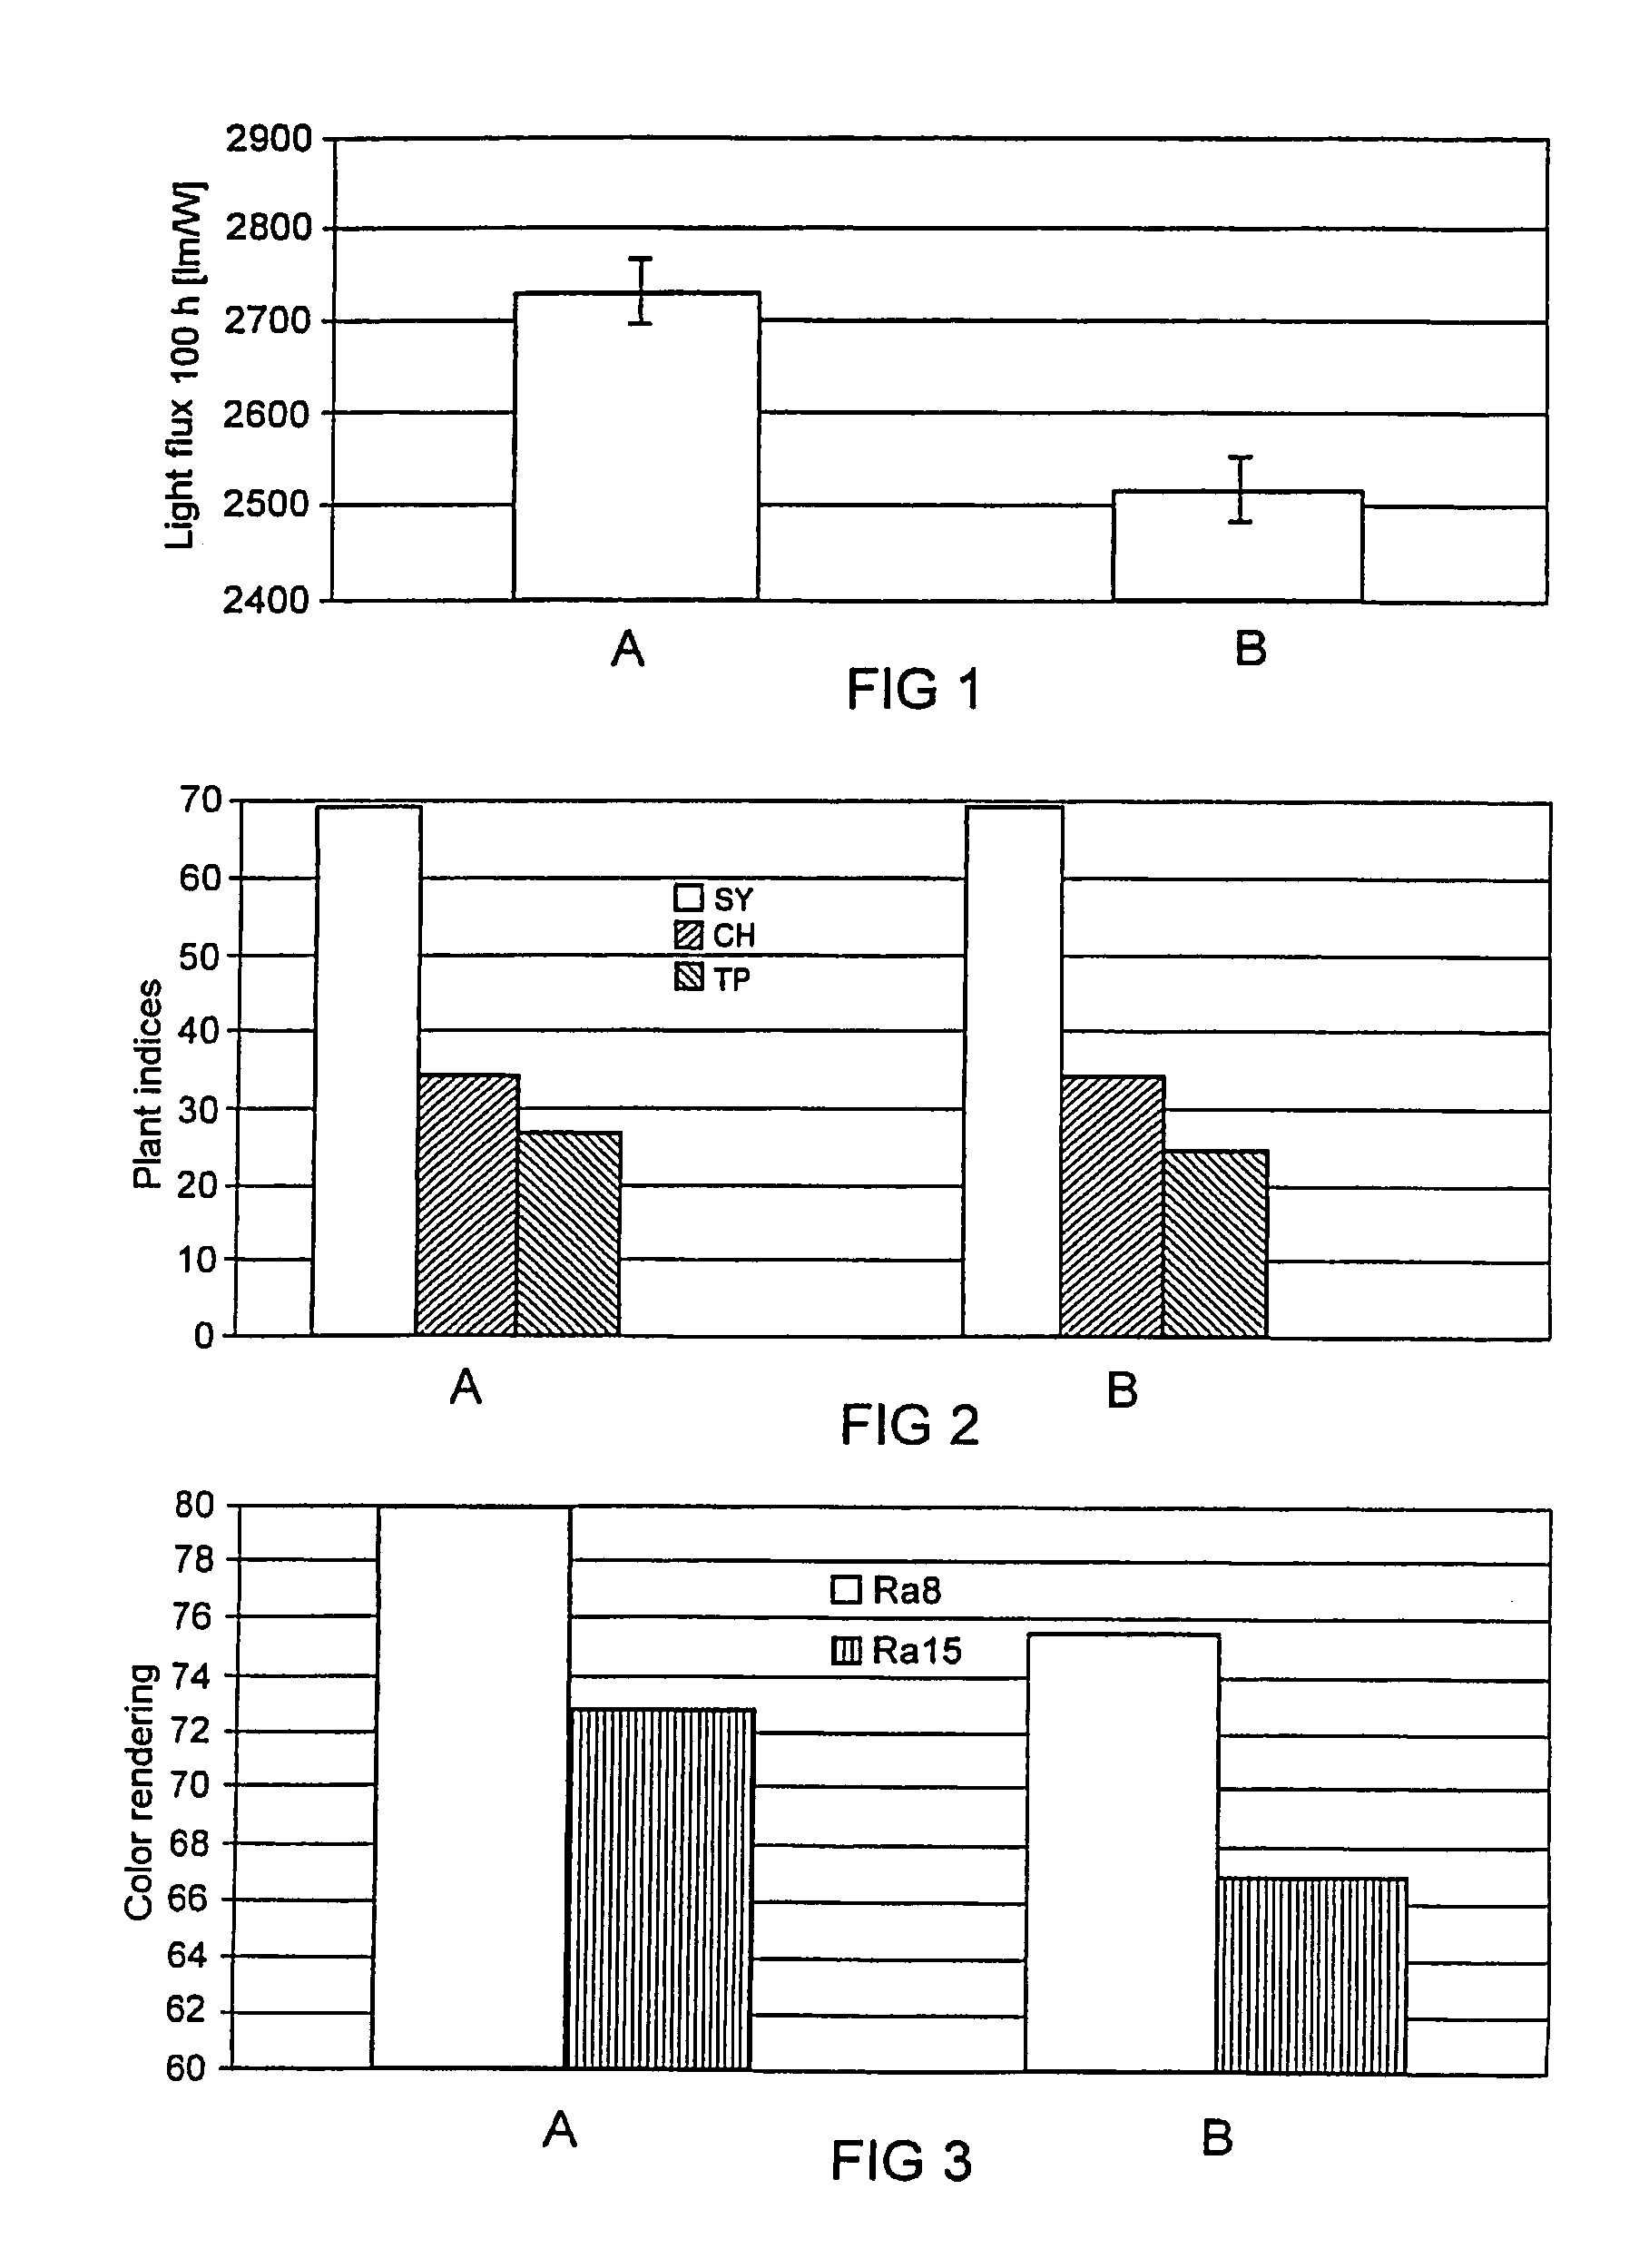 Phosphor coating composition for a mercury low-pressure discharge lamp for illuminating plants